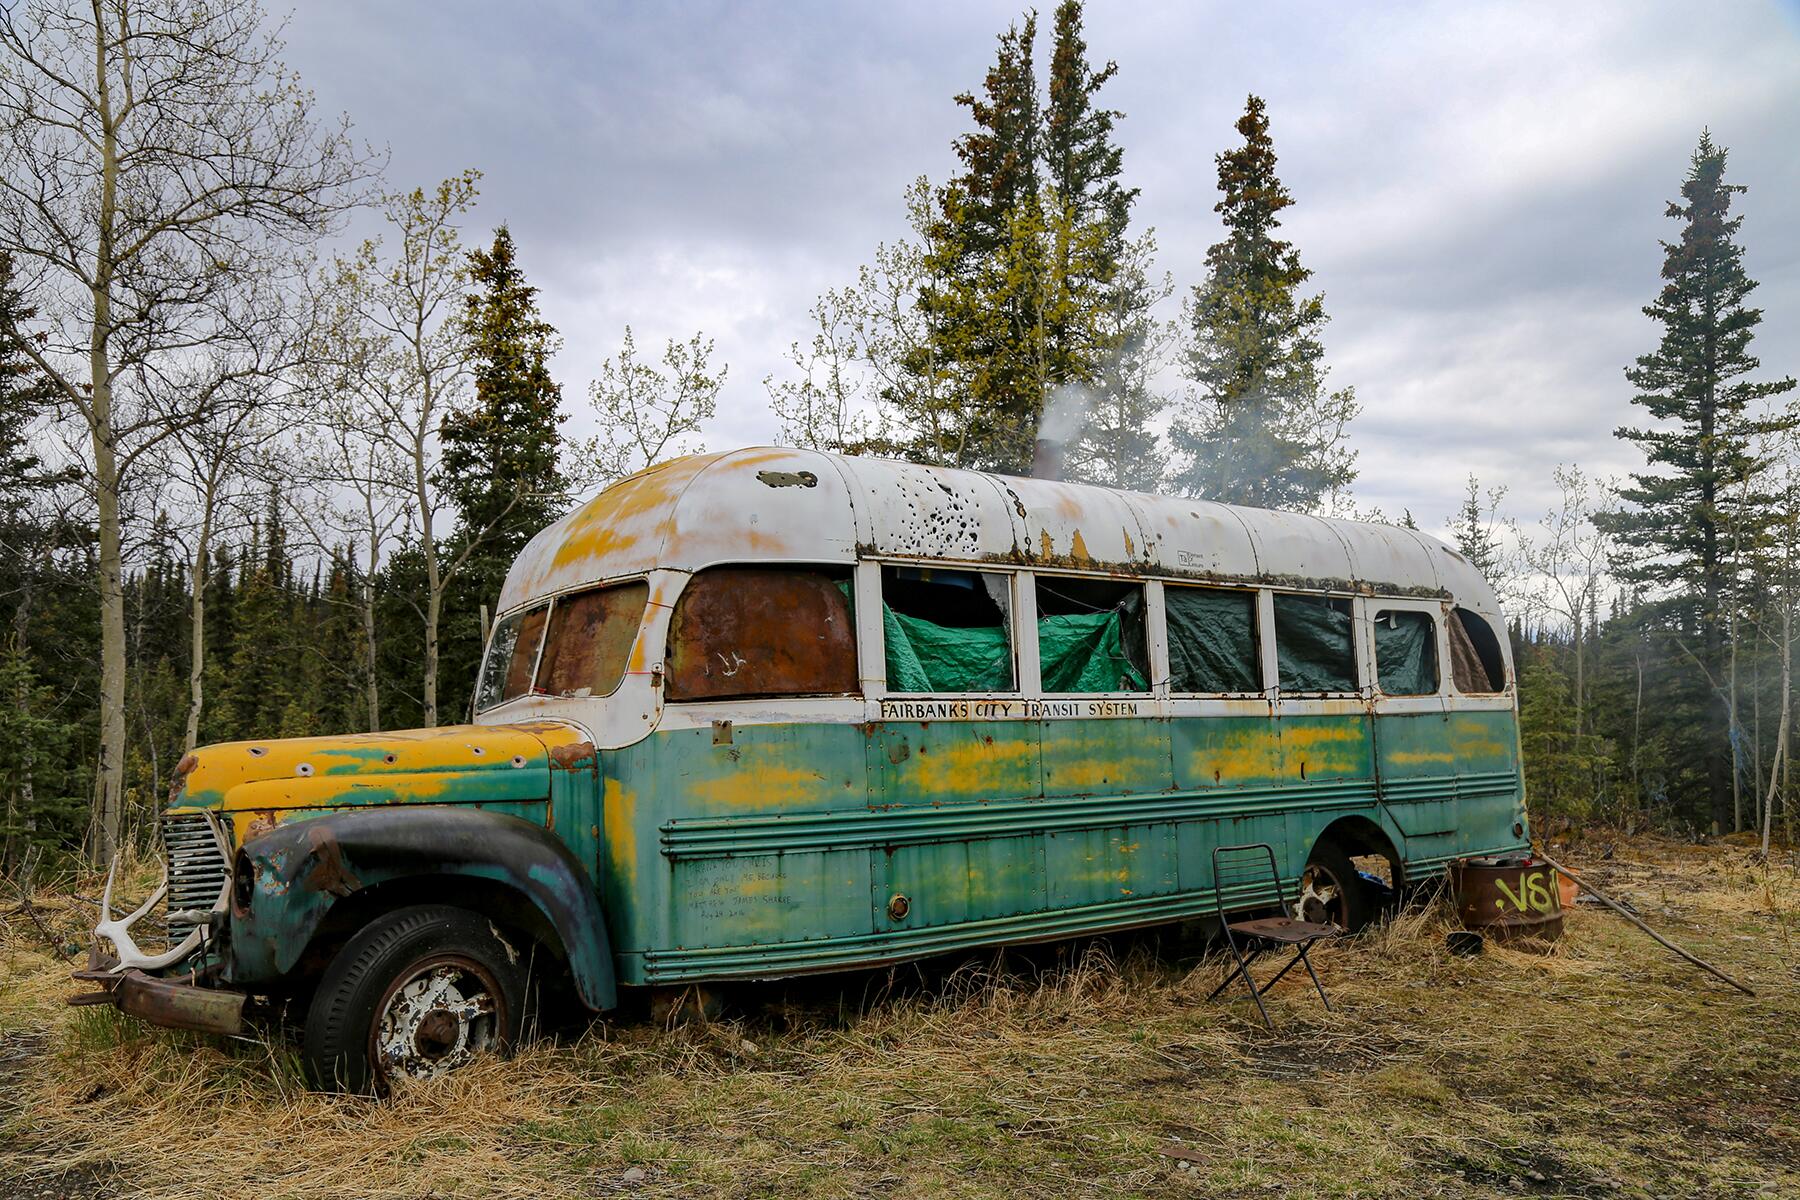 You Can Visit the “Into the Wild” Bus, but Is That What Christopher  Mccandless Would Have Wanted?